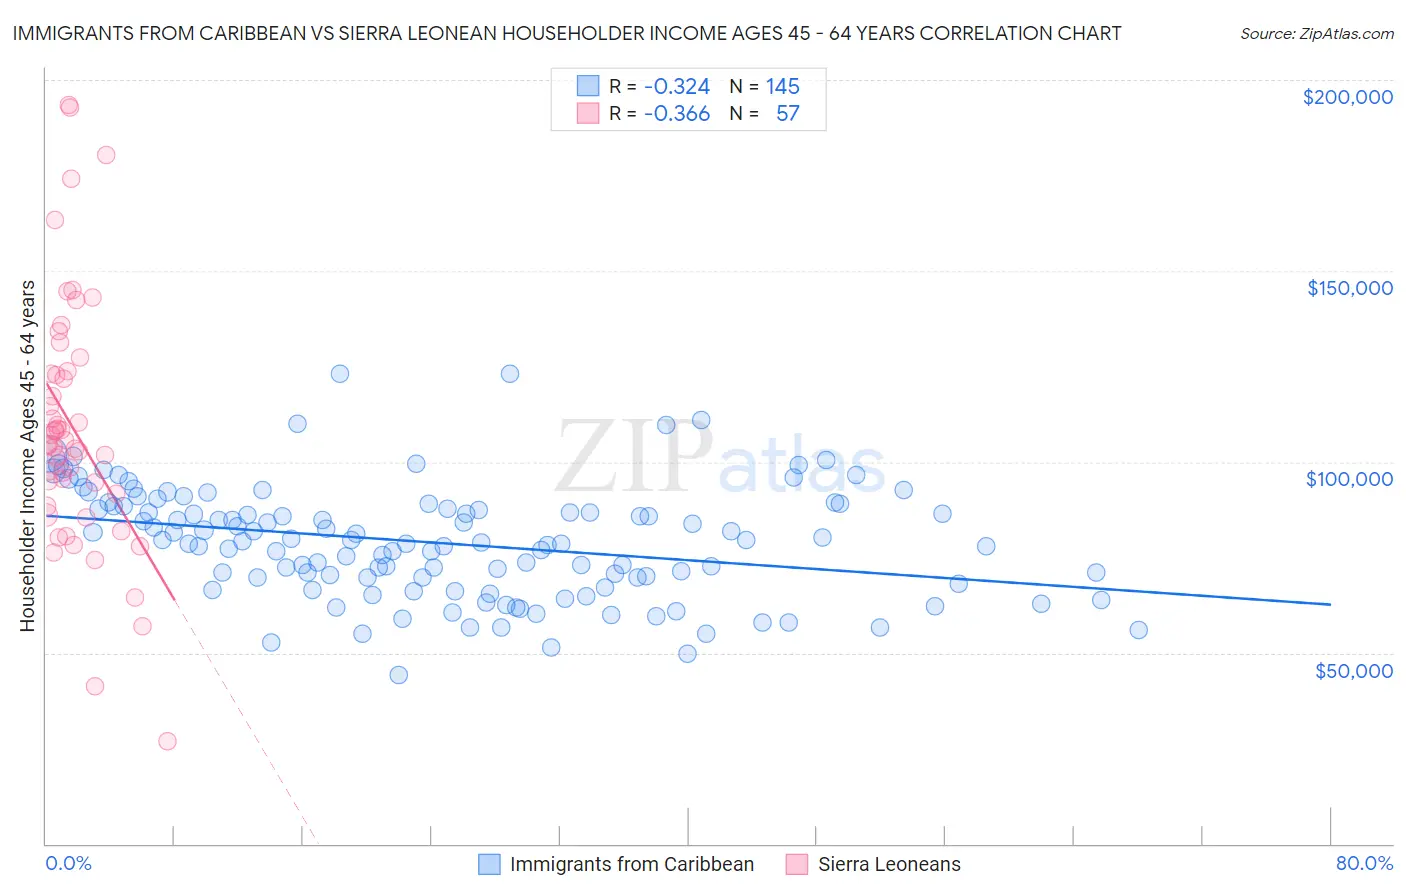 Immigrants from Caribbean vs Sierra Leonean Householder Income Ages 45 - 64 years